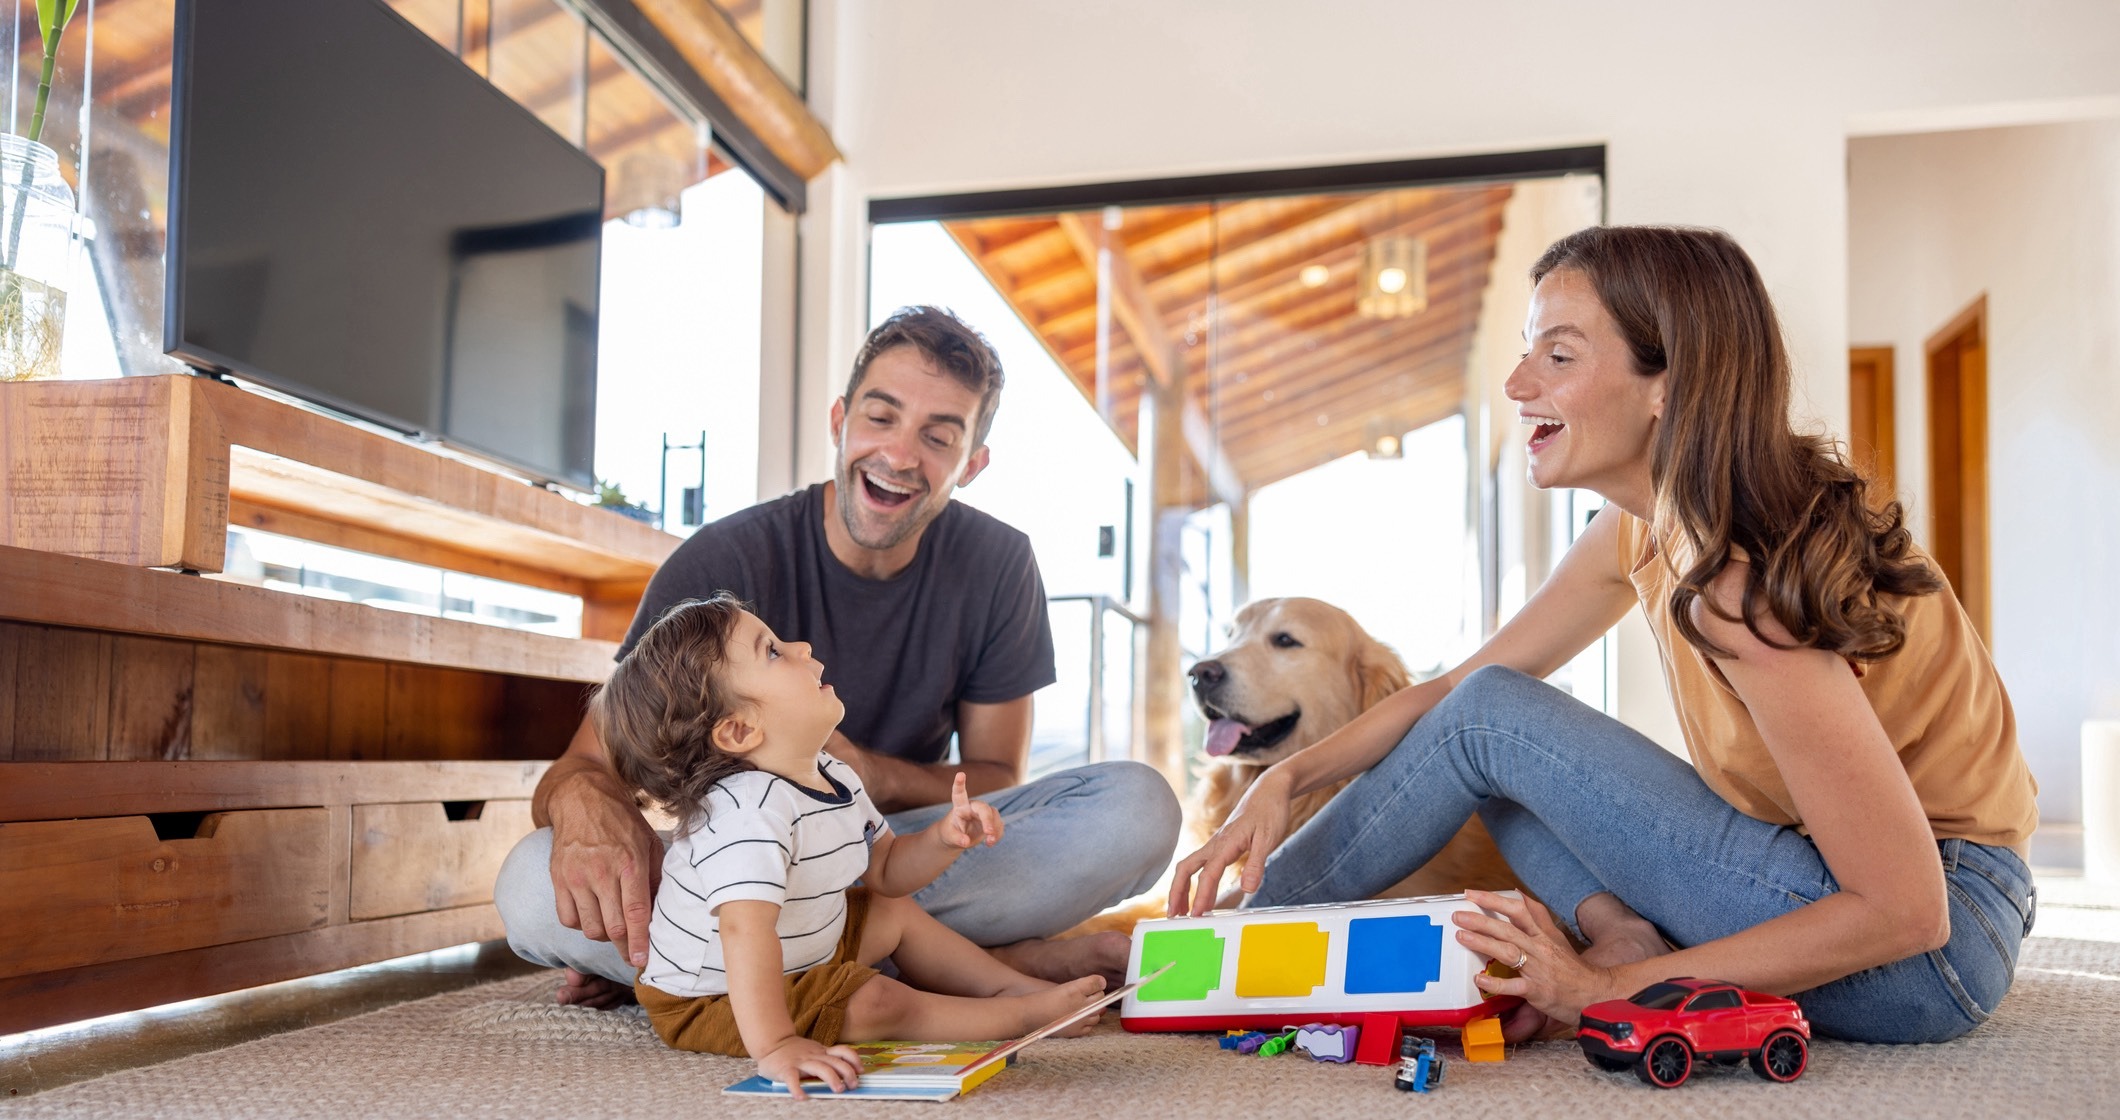 A happy family with a young child and a golden retriever dog playing with toys on the living room floor, smiling and enjoying time together.